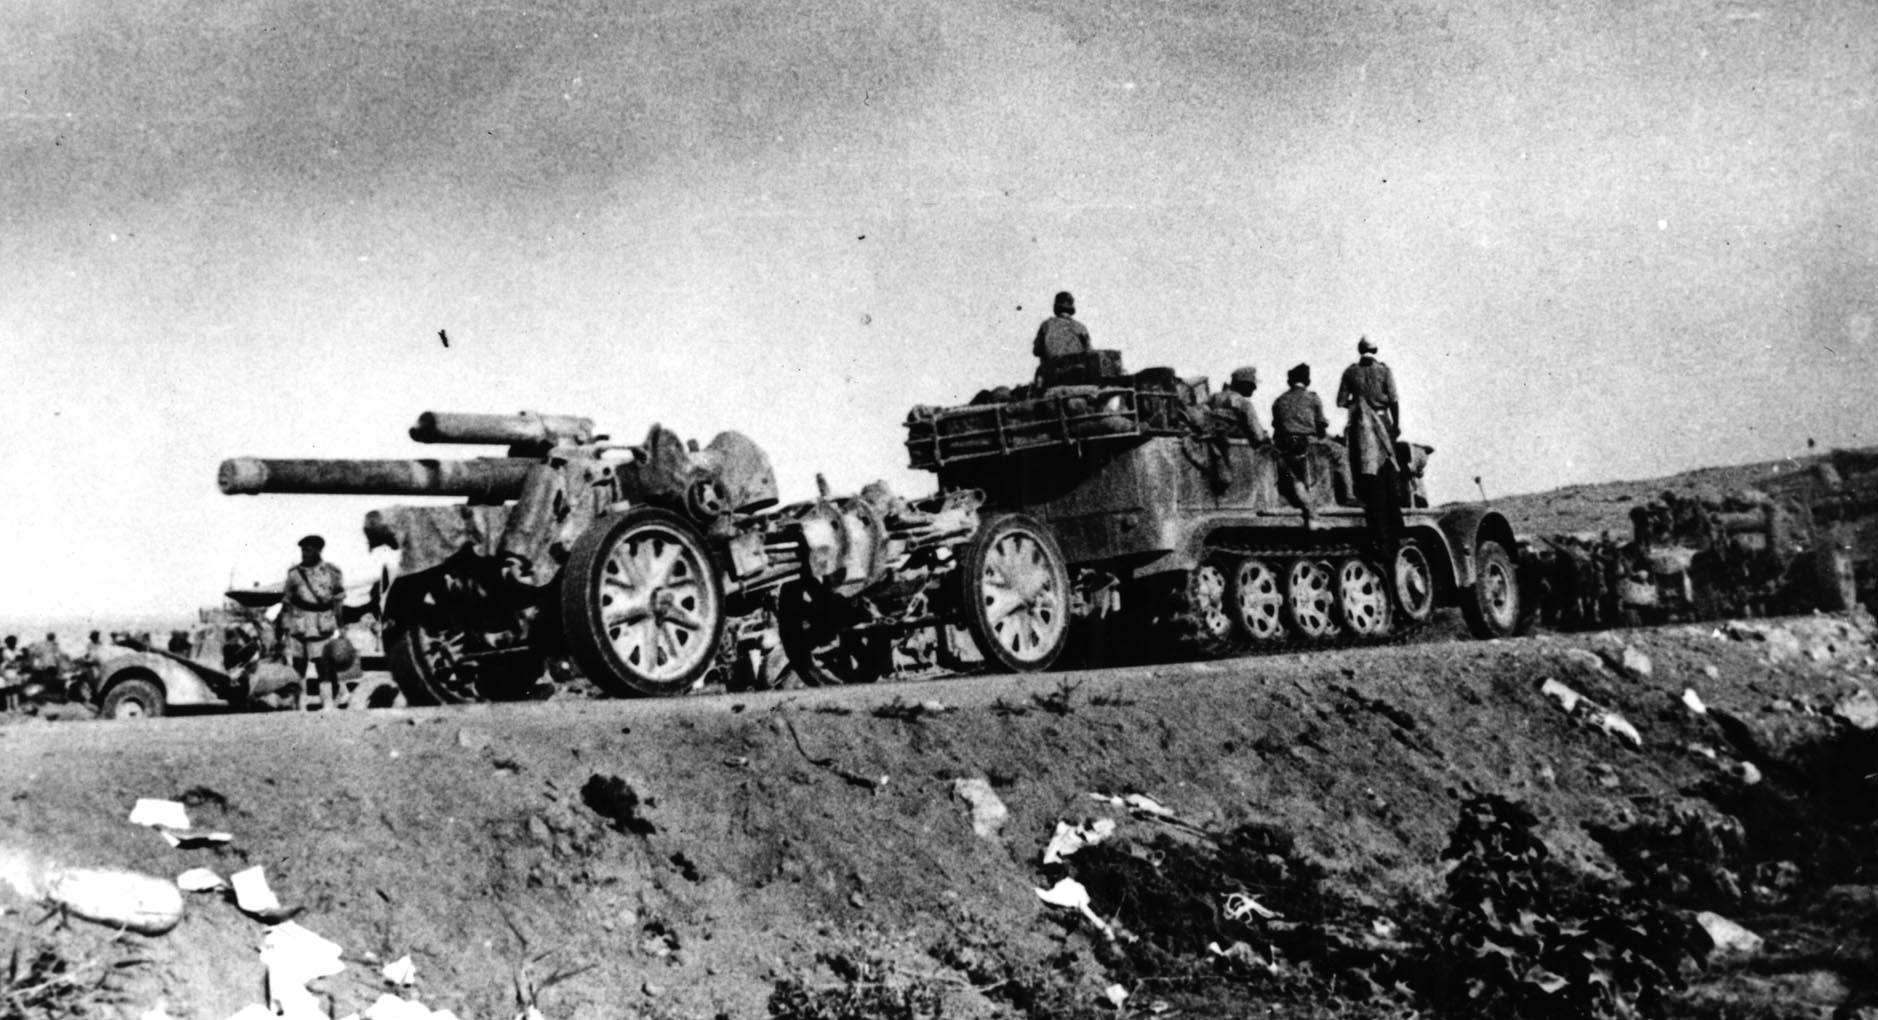 Panzerarmee Afrika artillery is towed into position during the early fighting at El Alamein. Rommel’s supply line was stretched to the breaking point in Egypt and only a small fraction of the supplies needed arrived each day